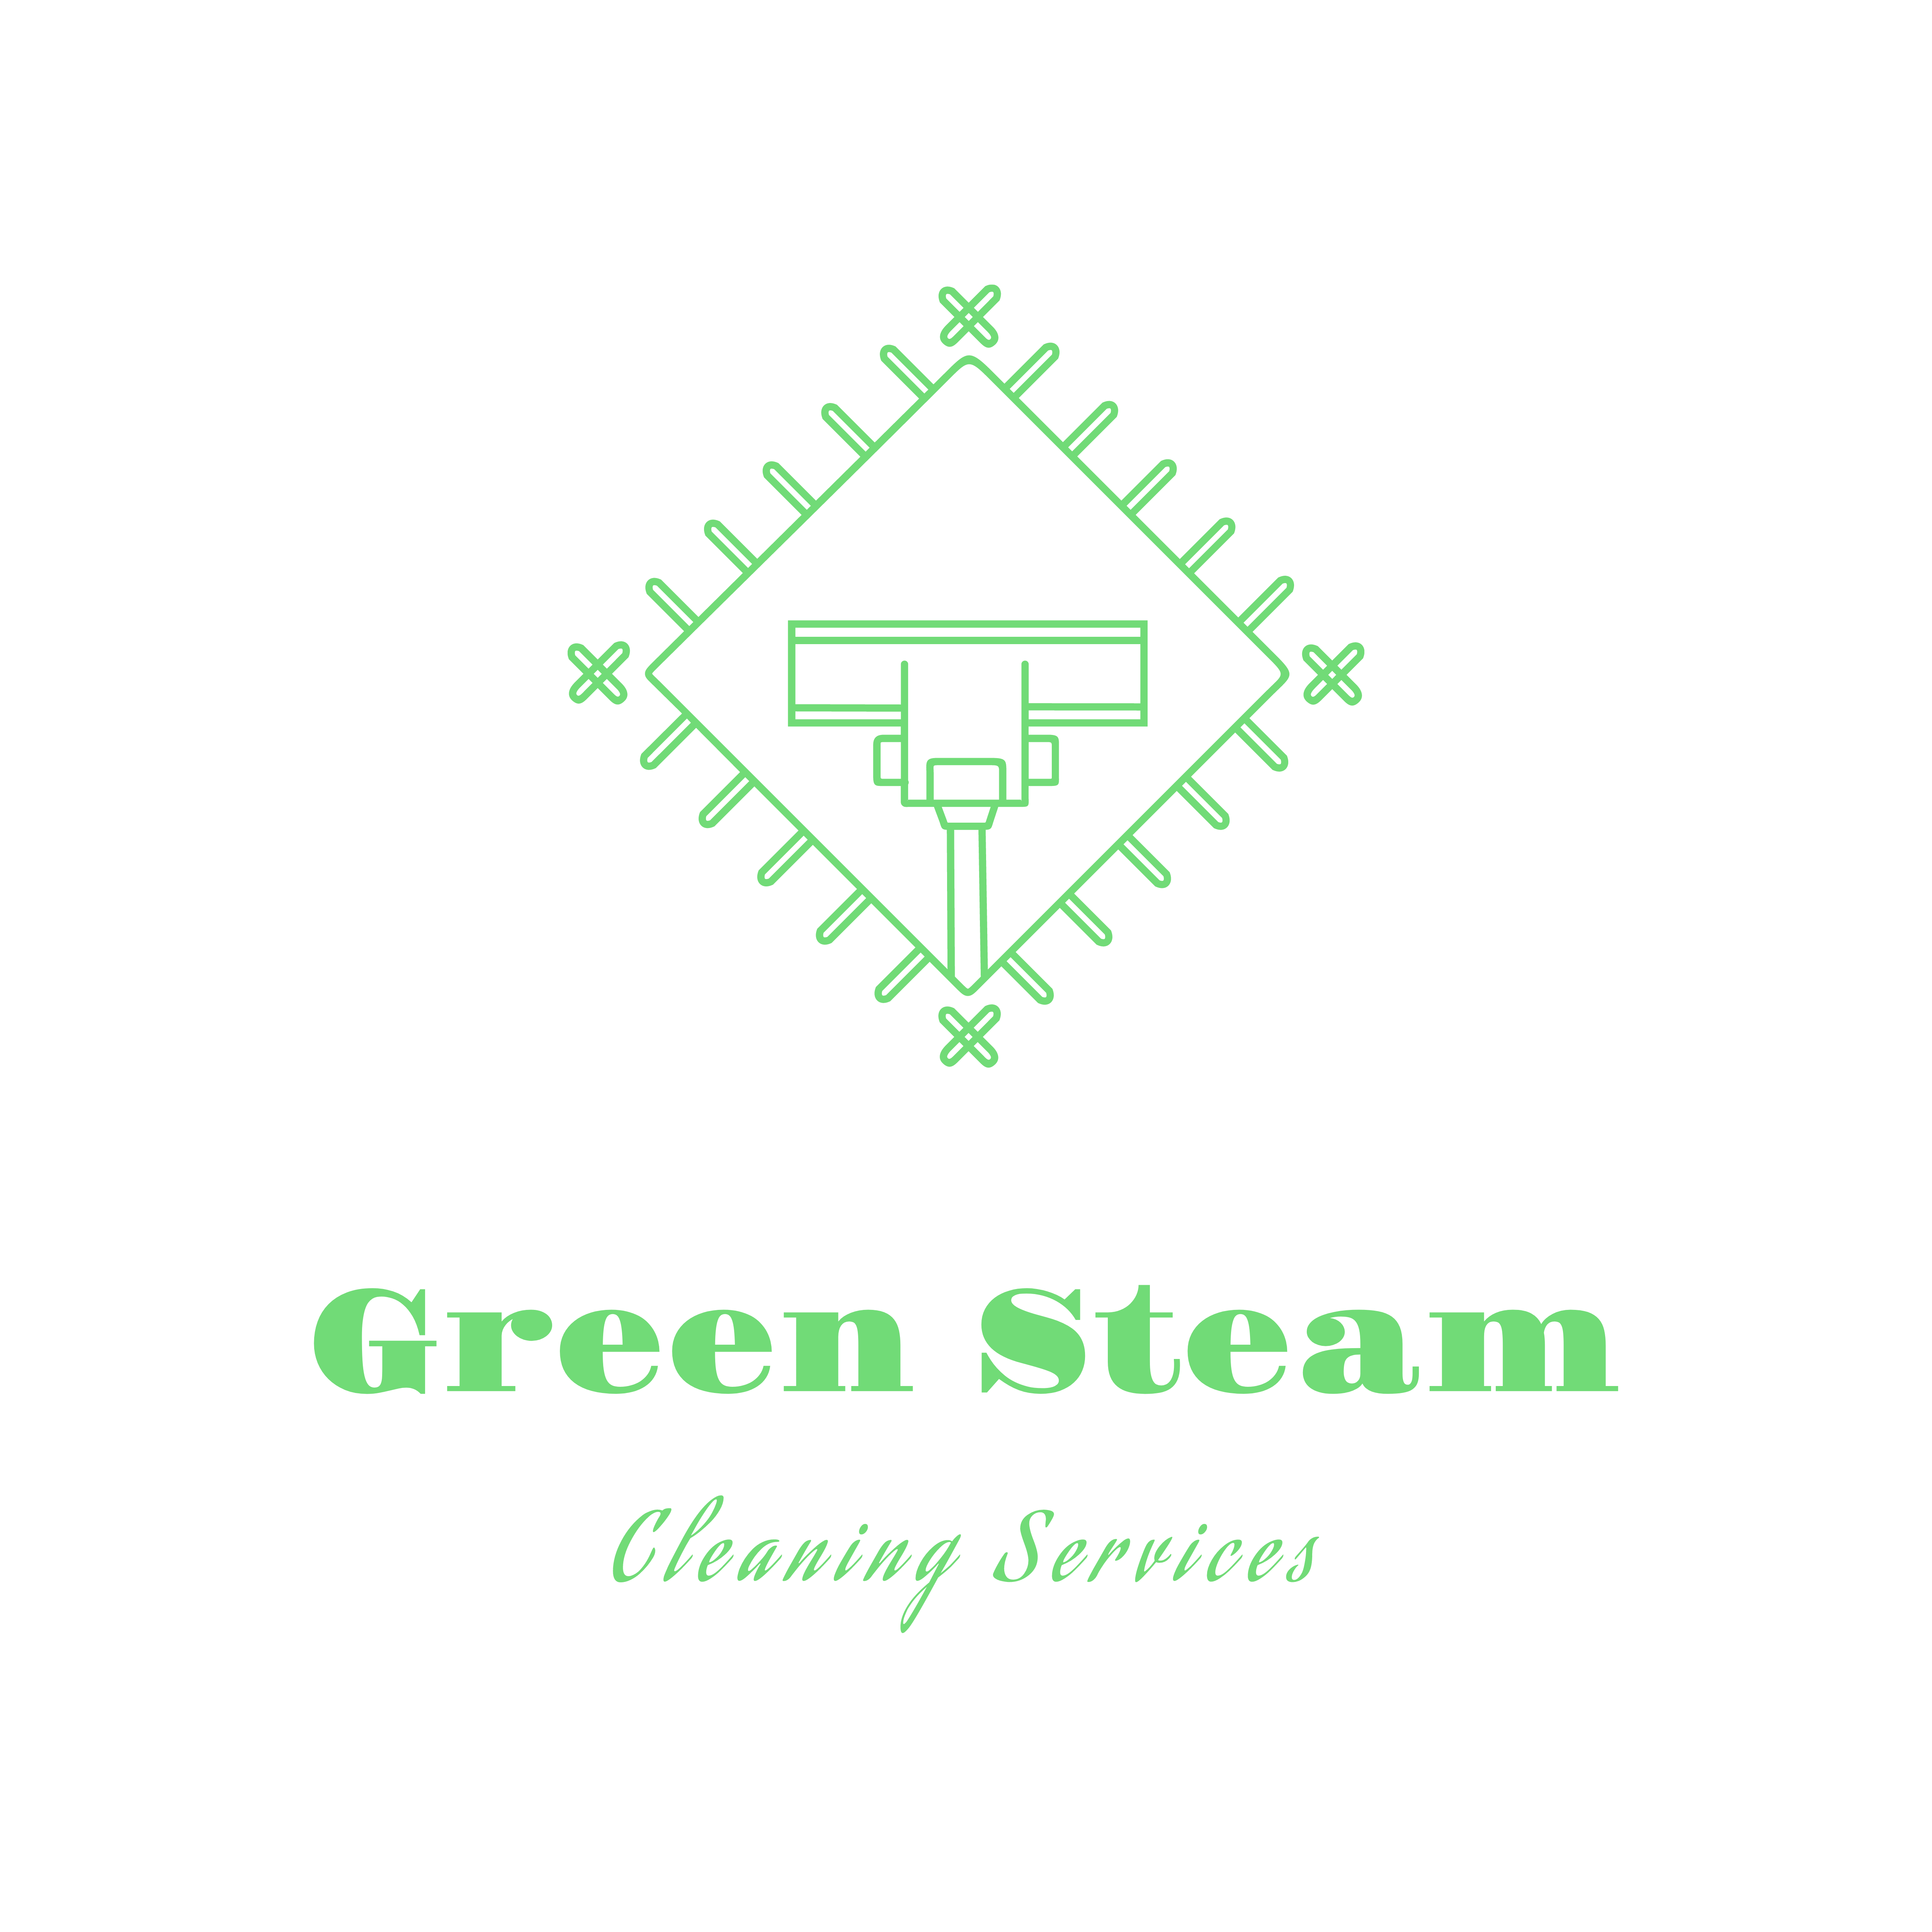 Green Steam Cleaning Services Logo